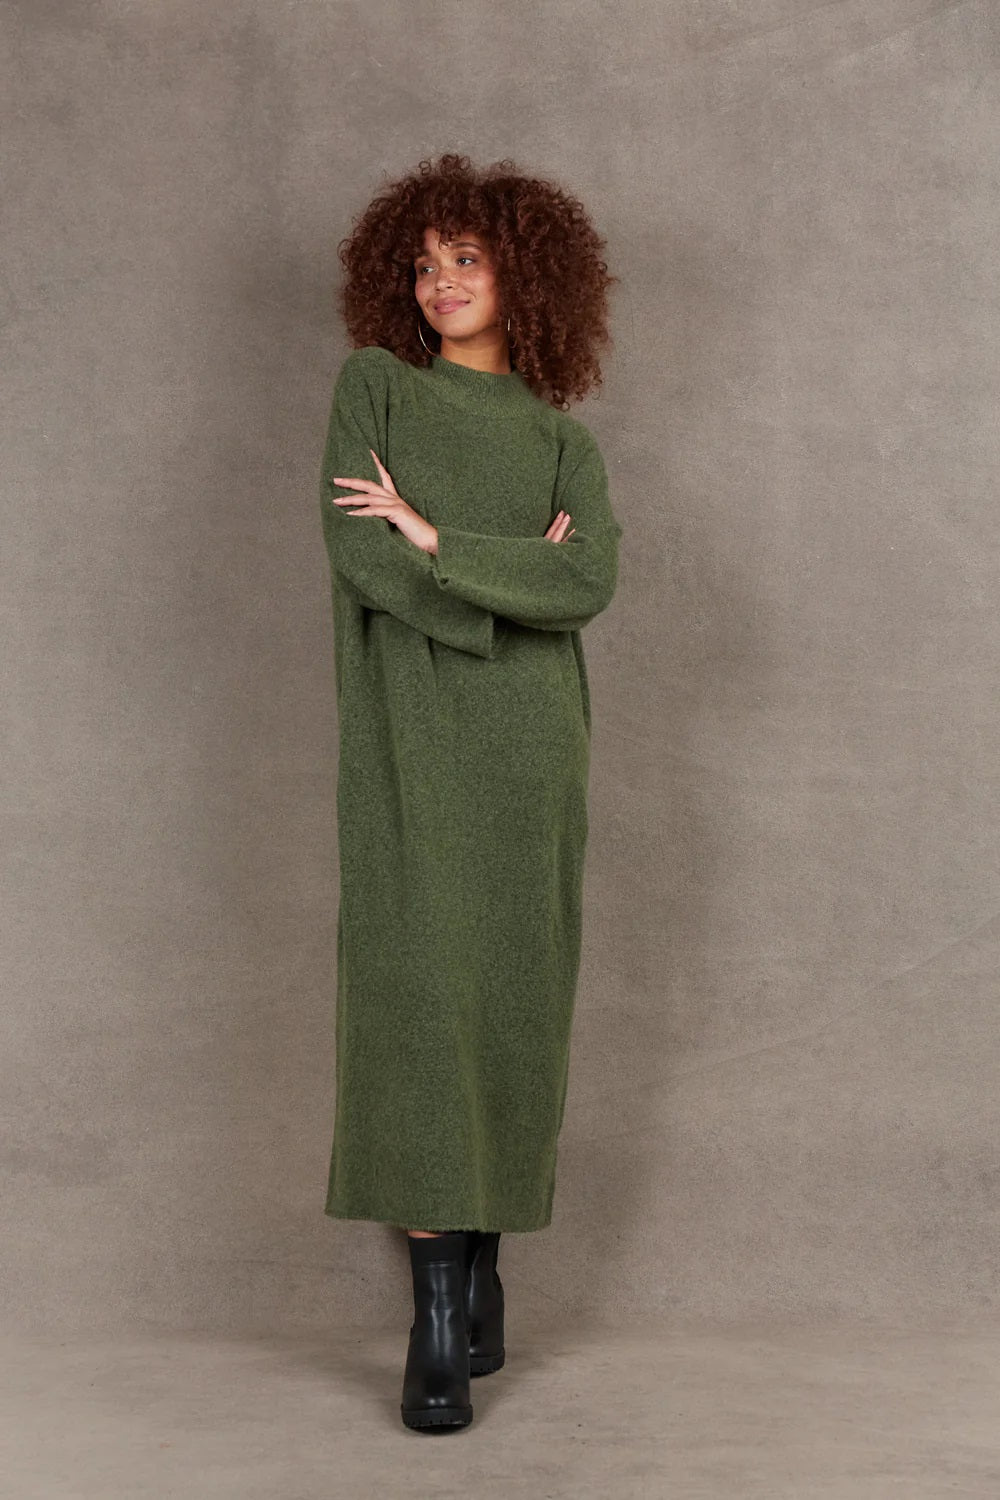 Eb & Ive Paarl Tie Knit Dress [COLOUR:Moss SIZE:One size]